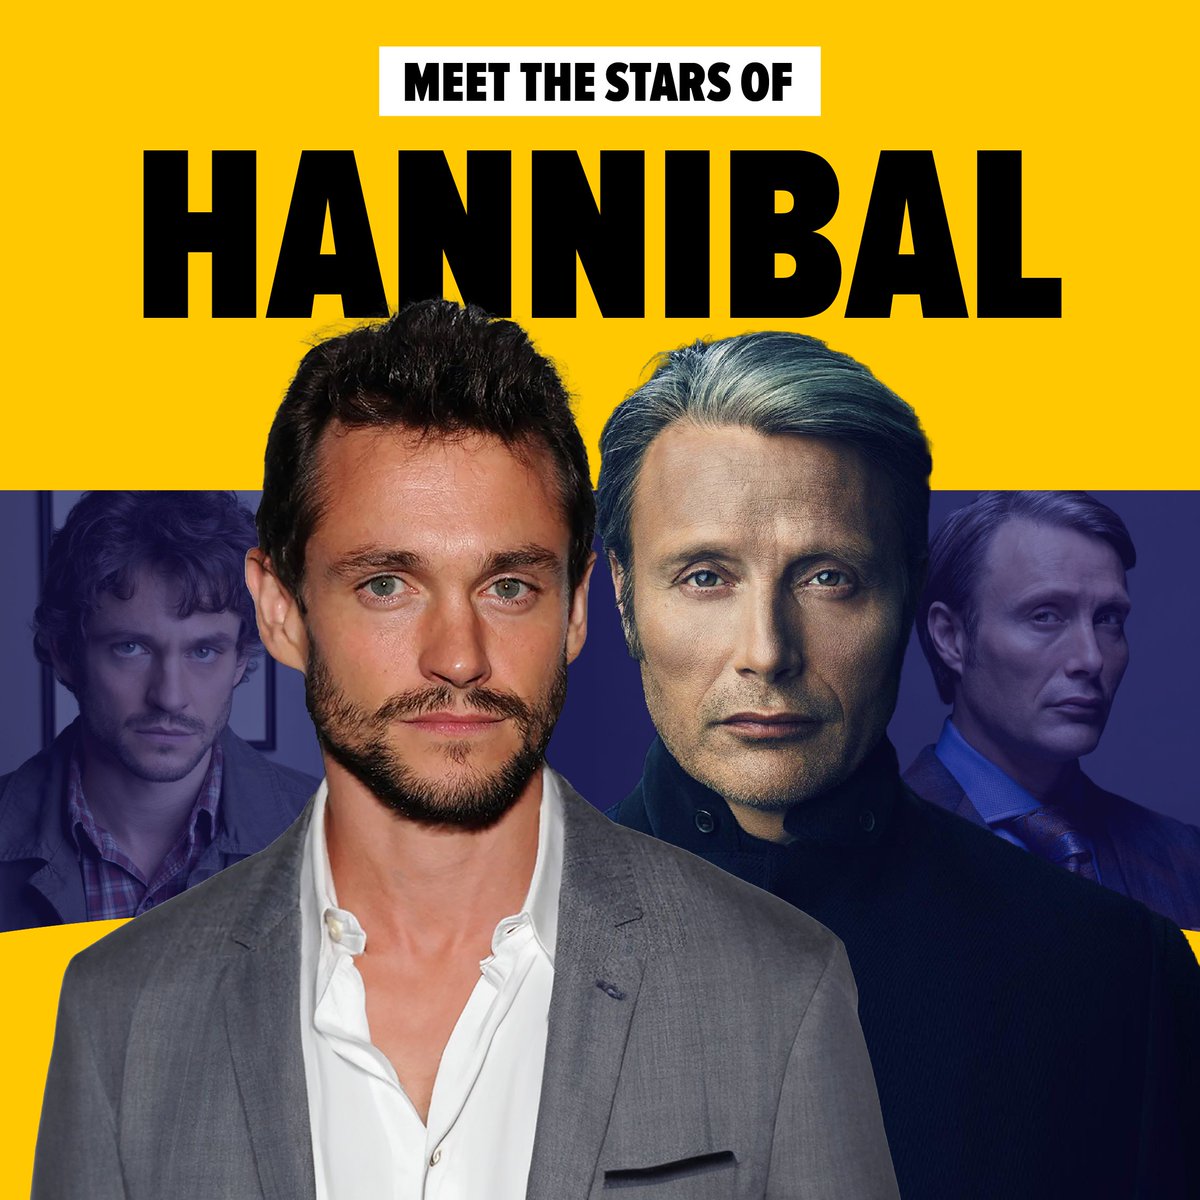 Their game continues in Boston. Meet Hugh Dancy (Will Graham) when he joins fellow Hannibal star Mads Mikkelsen (Dr. Hannibal Lecter) at #FANEXPOBoston this June. Grab your tickets today: spr.ly/6015dDkSt

#Hannibal #HughDancy #MadsMikkelsen #WillGraham #HannibalLecter